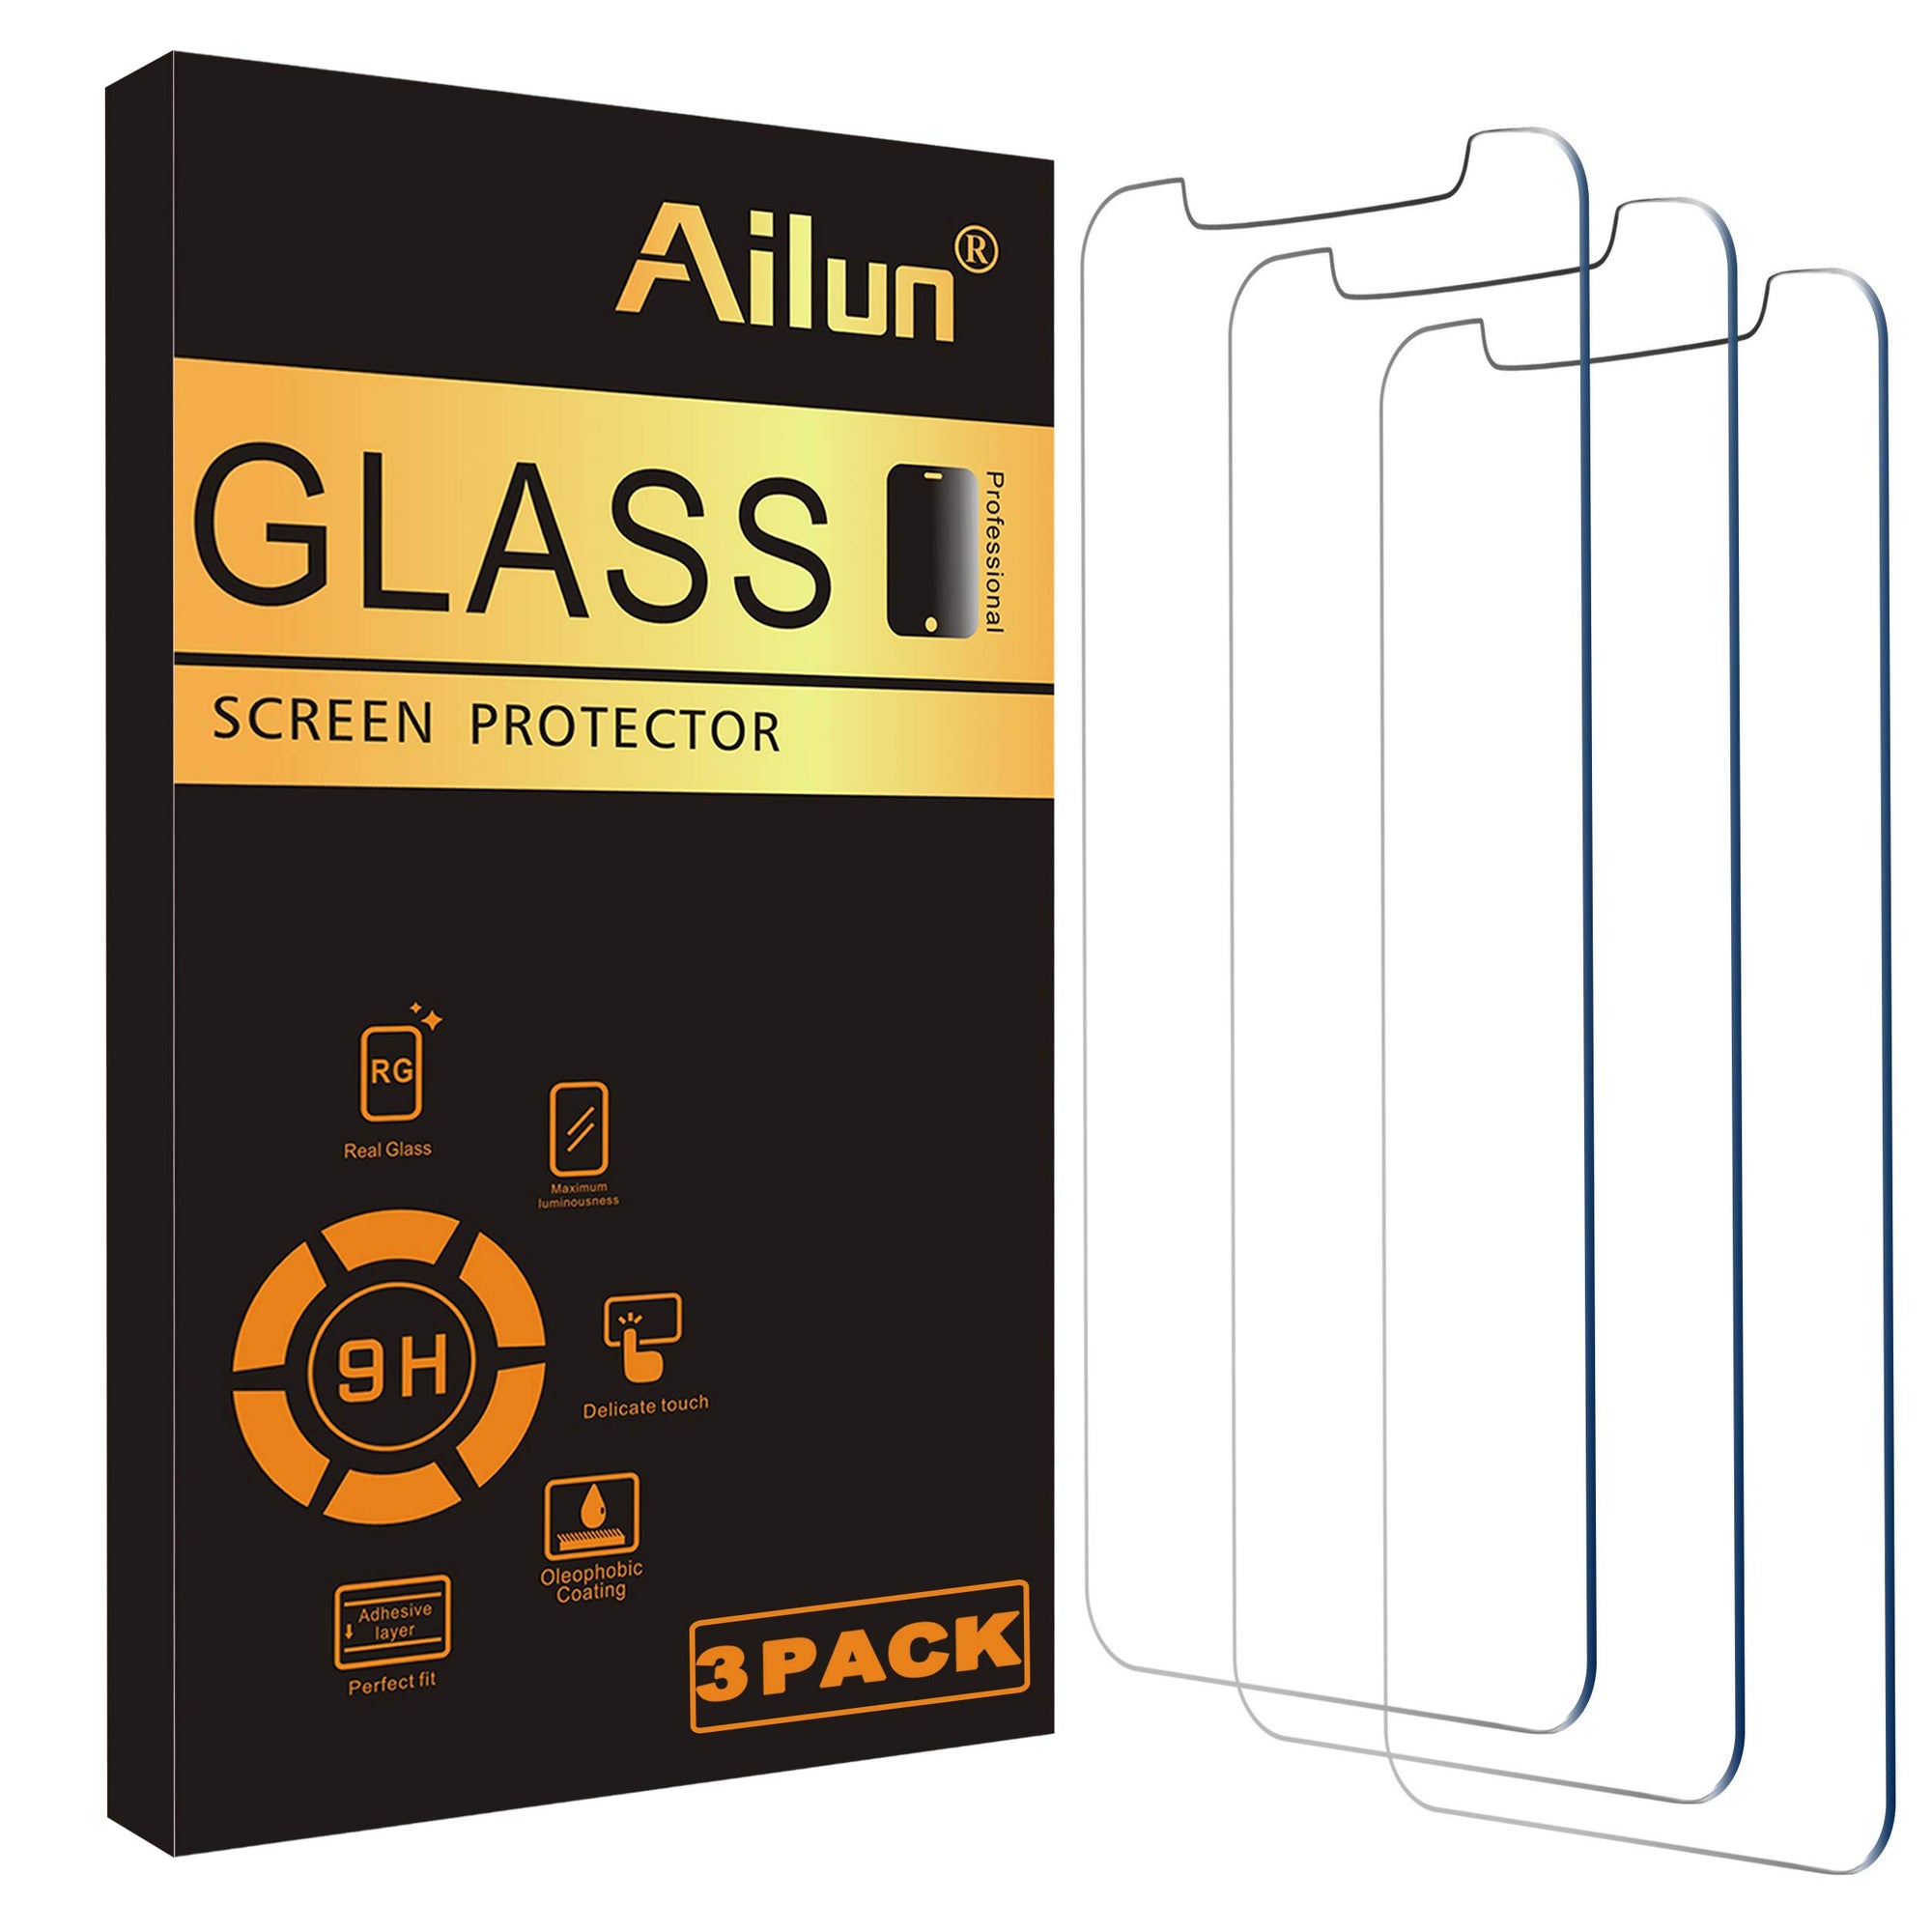 Ailun Glass Screen Protector Compatible for iPhone 12 or 12 Pro 2020 3pk